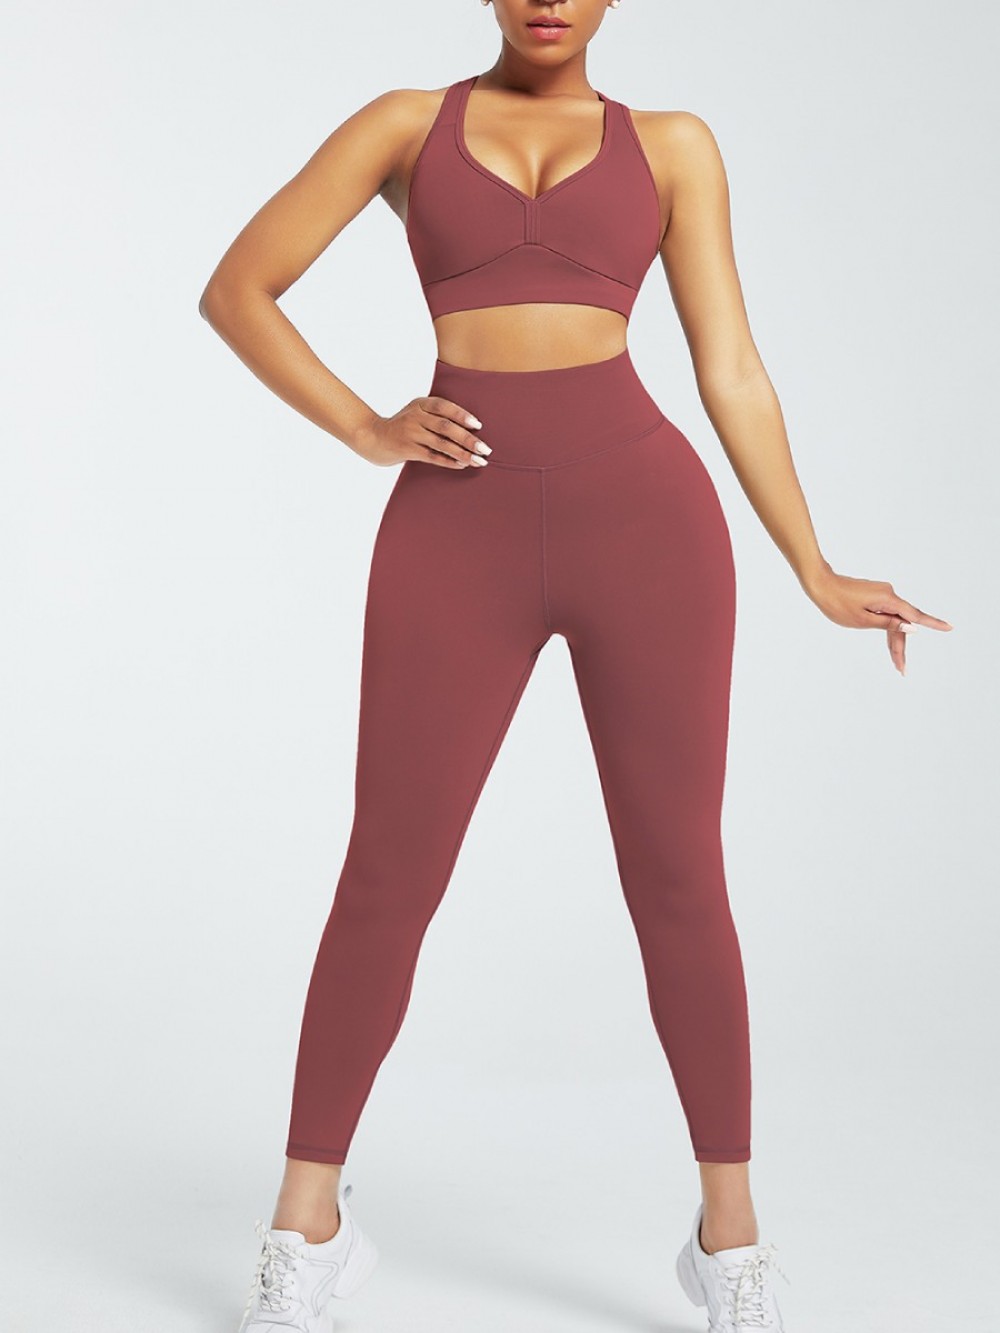 Jujube Red Running Suit High Rise Solid Color For Exercising